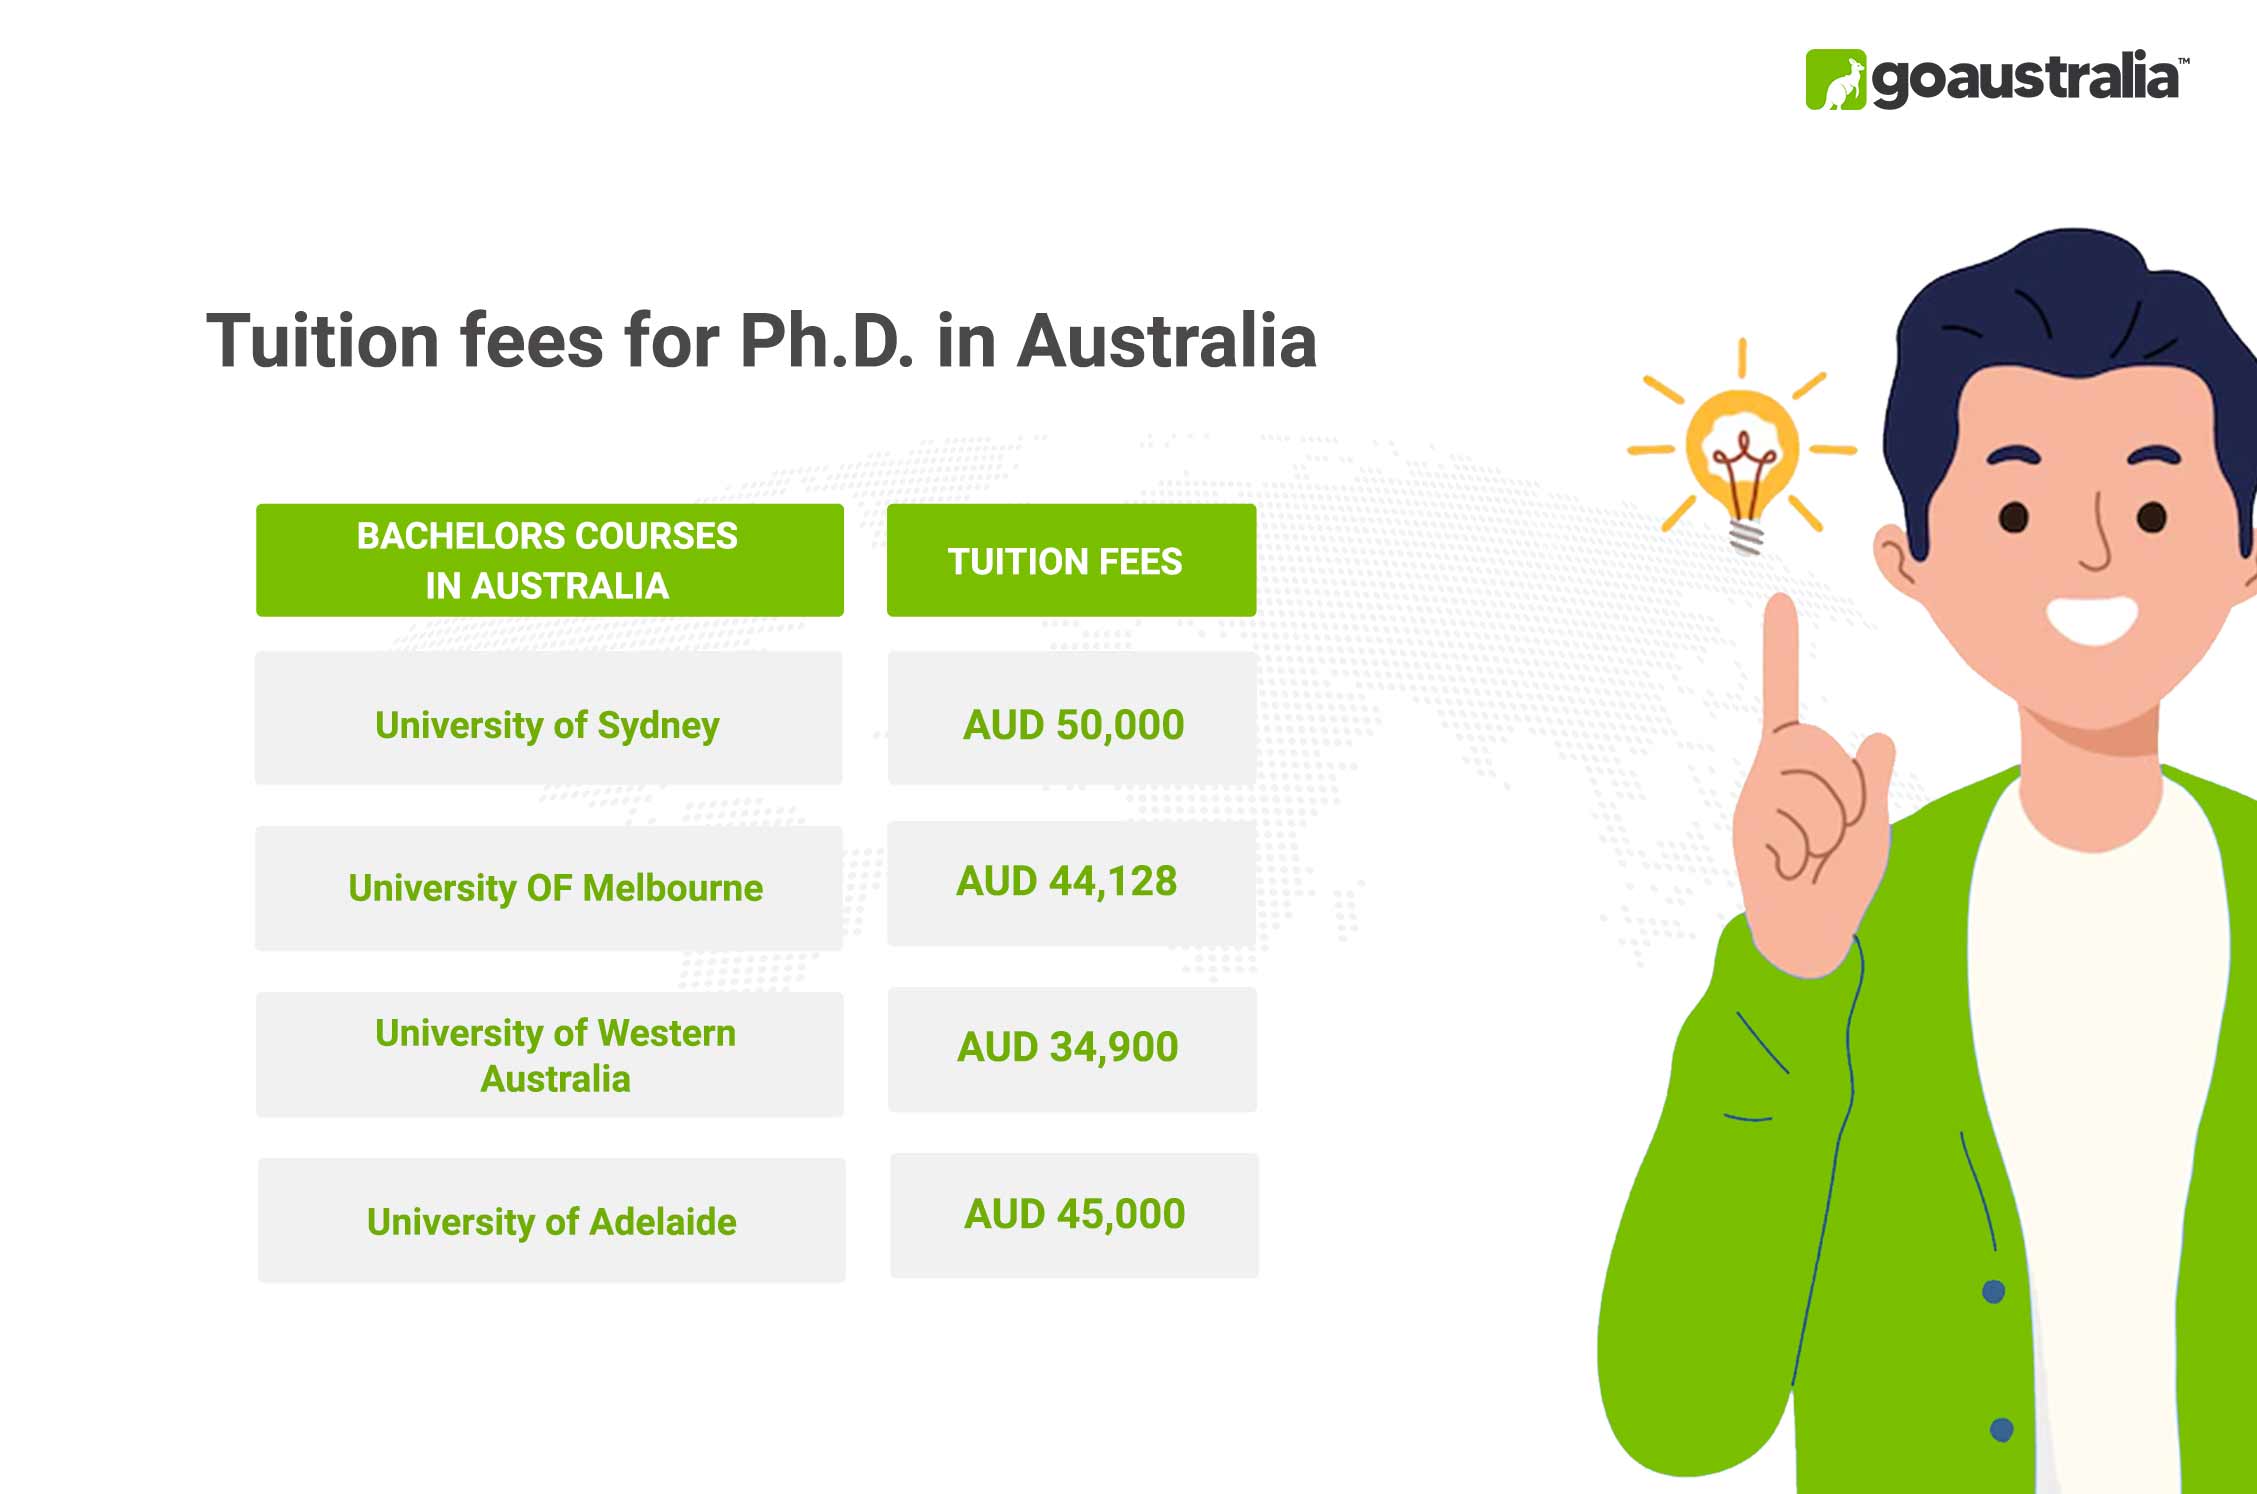 Tuition fees for Ph.D. in Australia